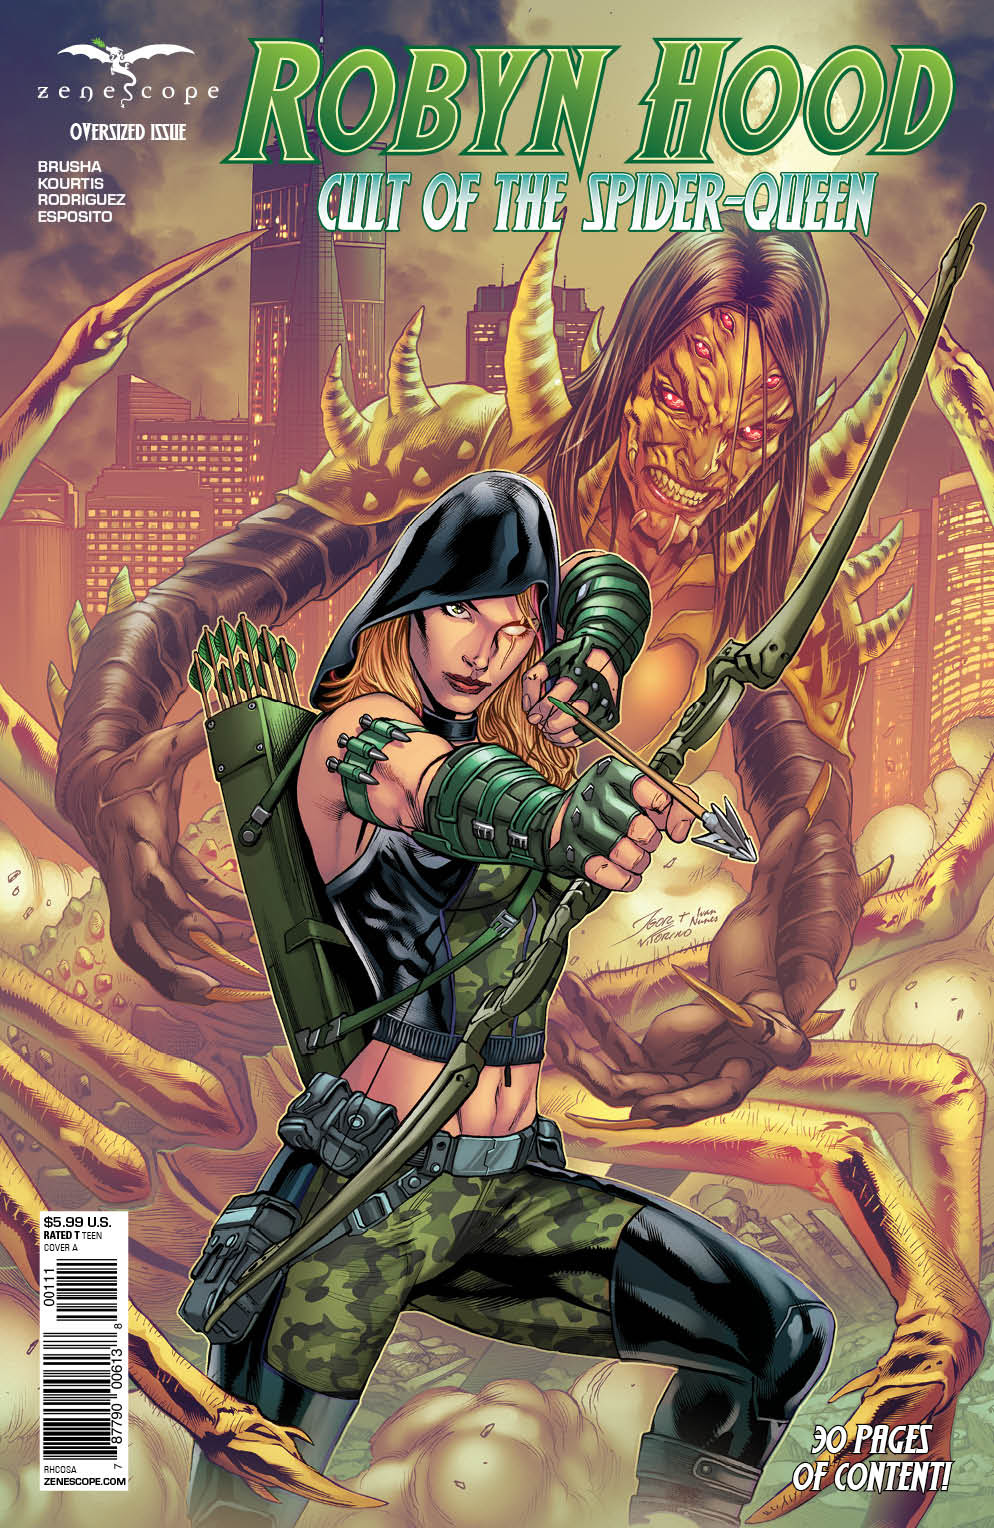 Robyn Hood - Cult of the Spider-Queen, cover A